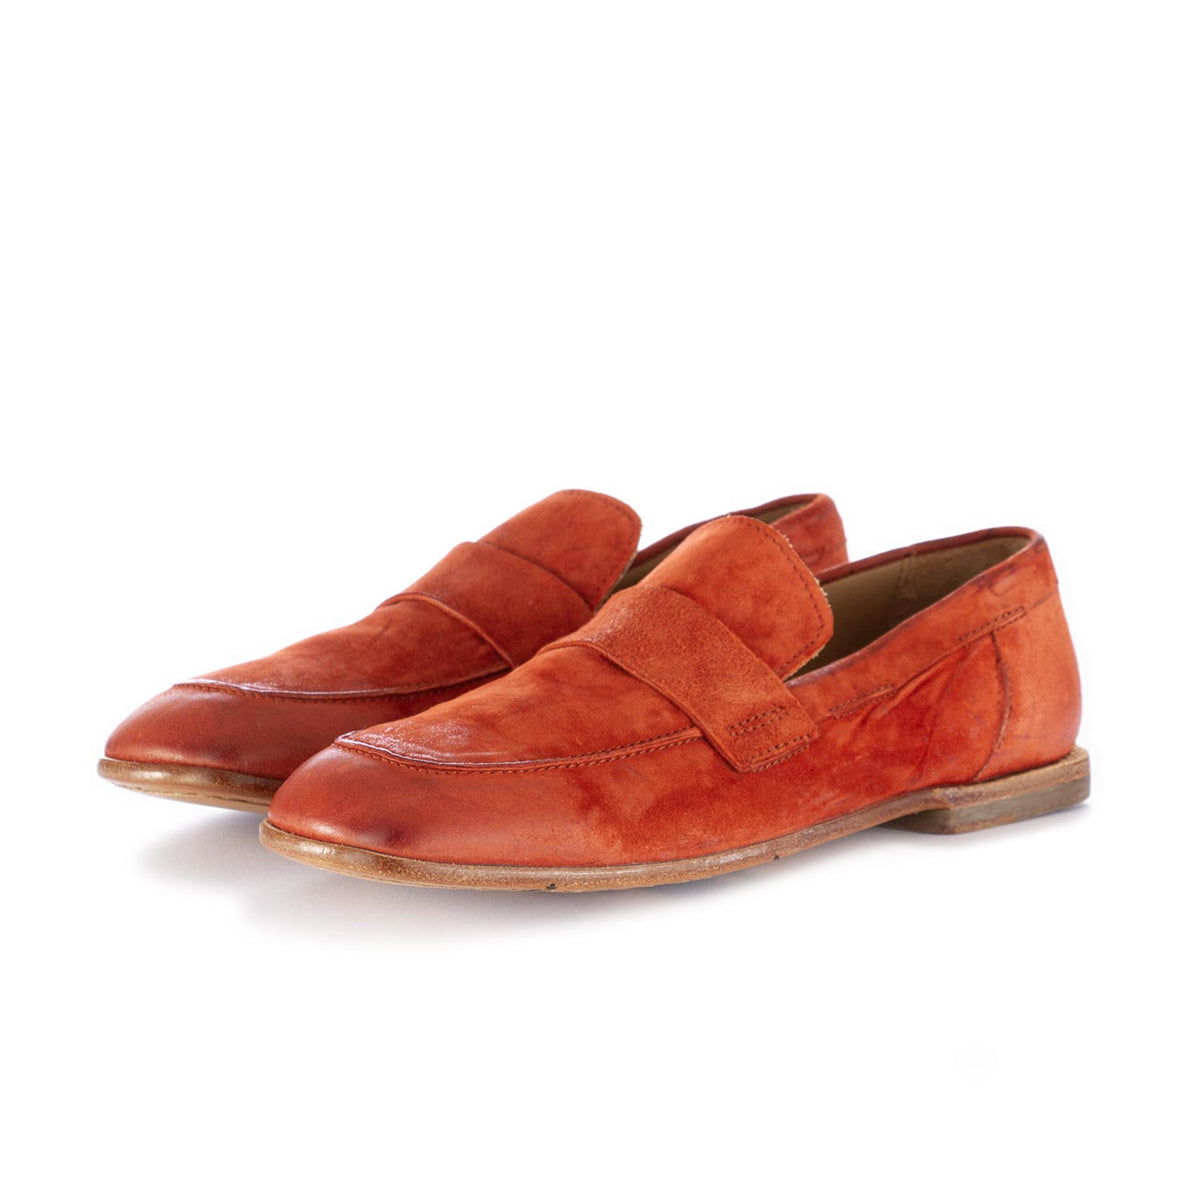 MOMA, City loafers brick red suede leather